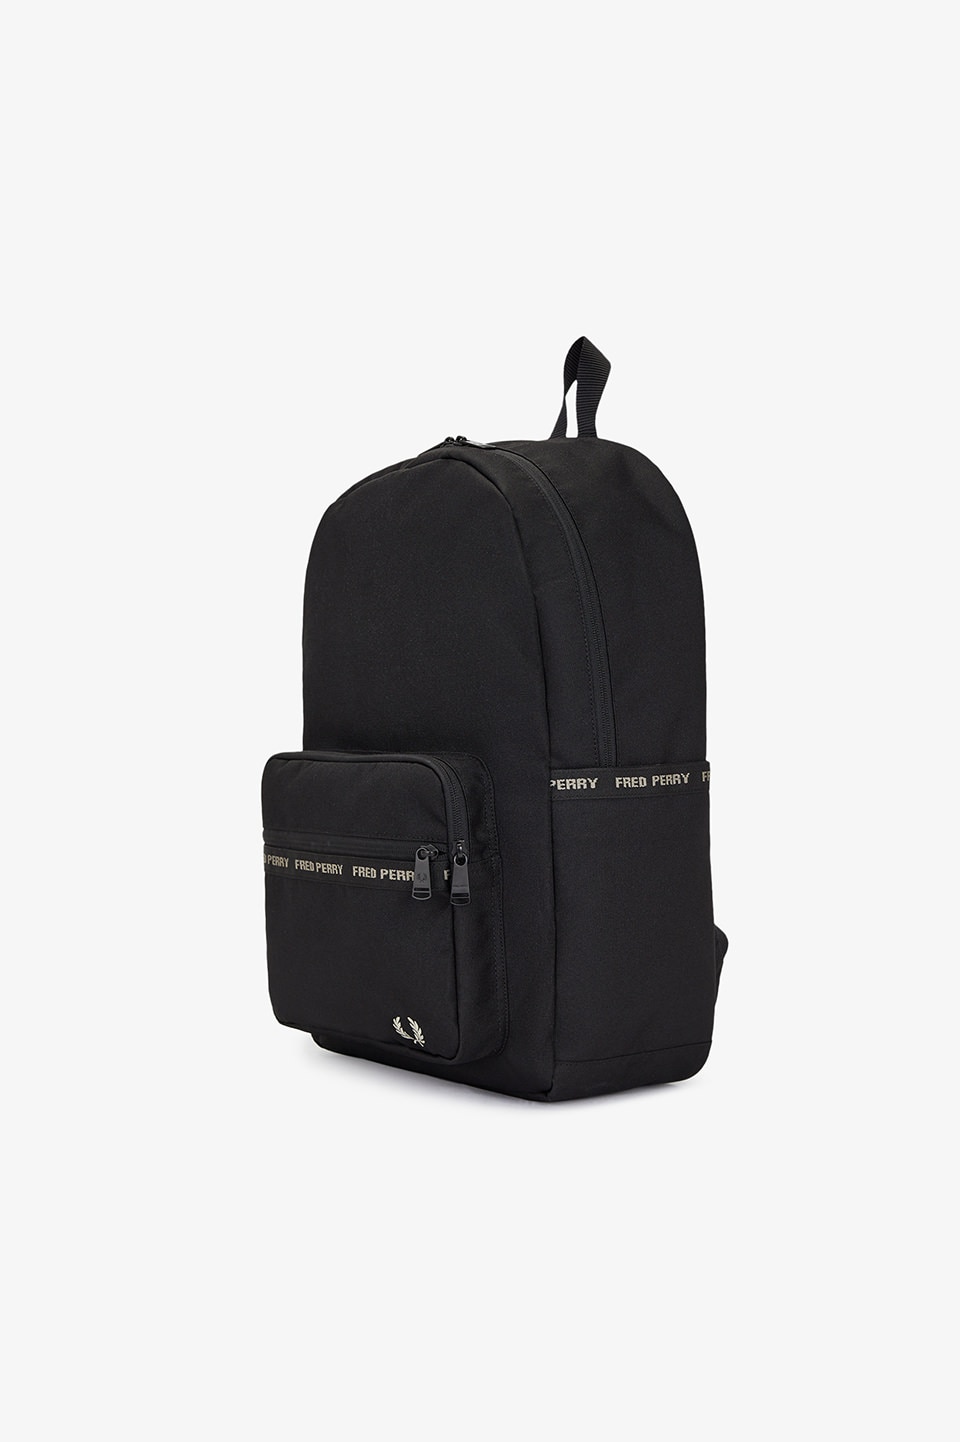 Fred Perry Taped Back Pack|FRED PERRY(フレッドペリー)の通販 